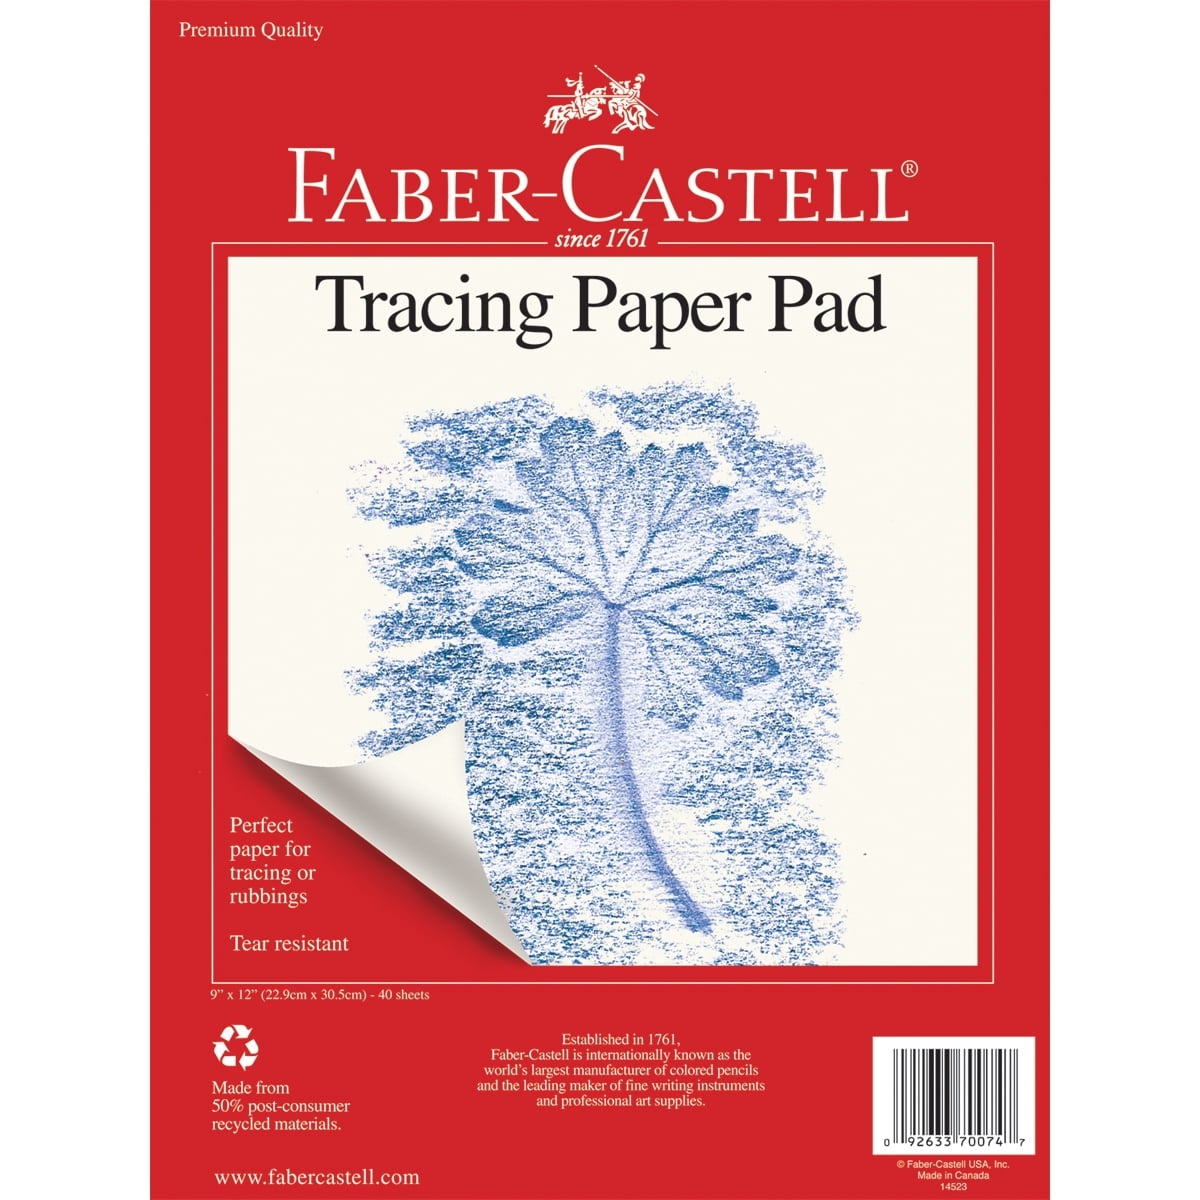 Faber-Castell Tracing Paper Pad - 40 Sheets (9 x 12 Inches)